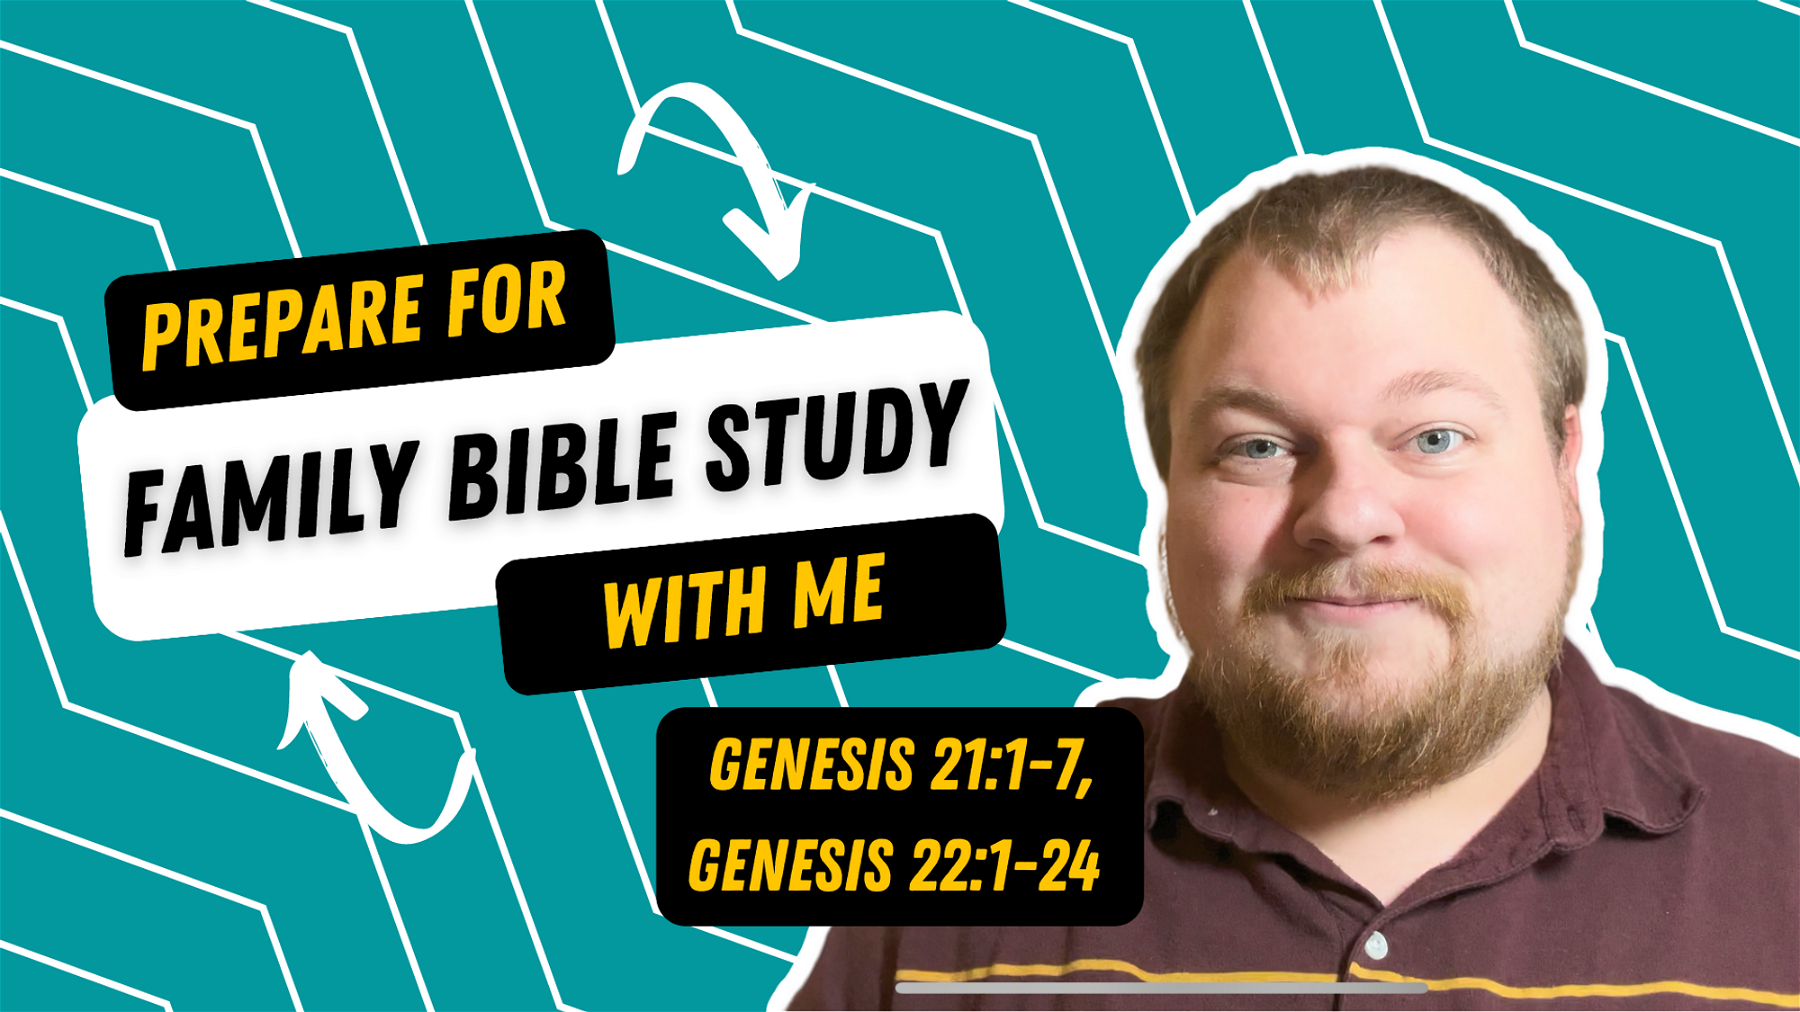 Let’s Study Genesis 20:1-7, 22:1-24- Prepare for Family Bible Study with Me